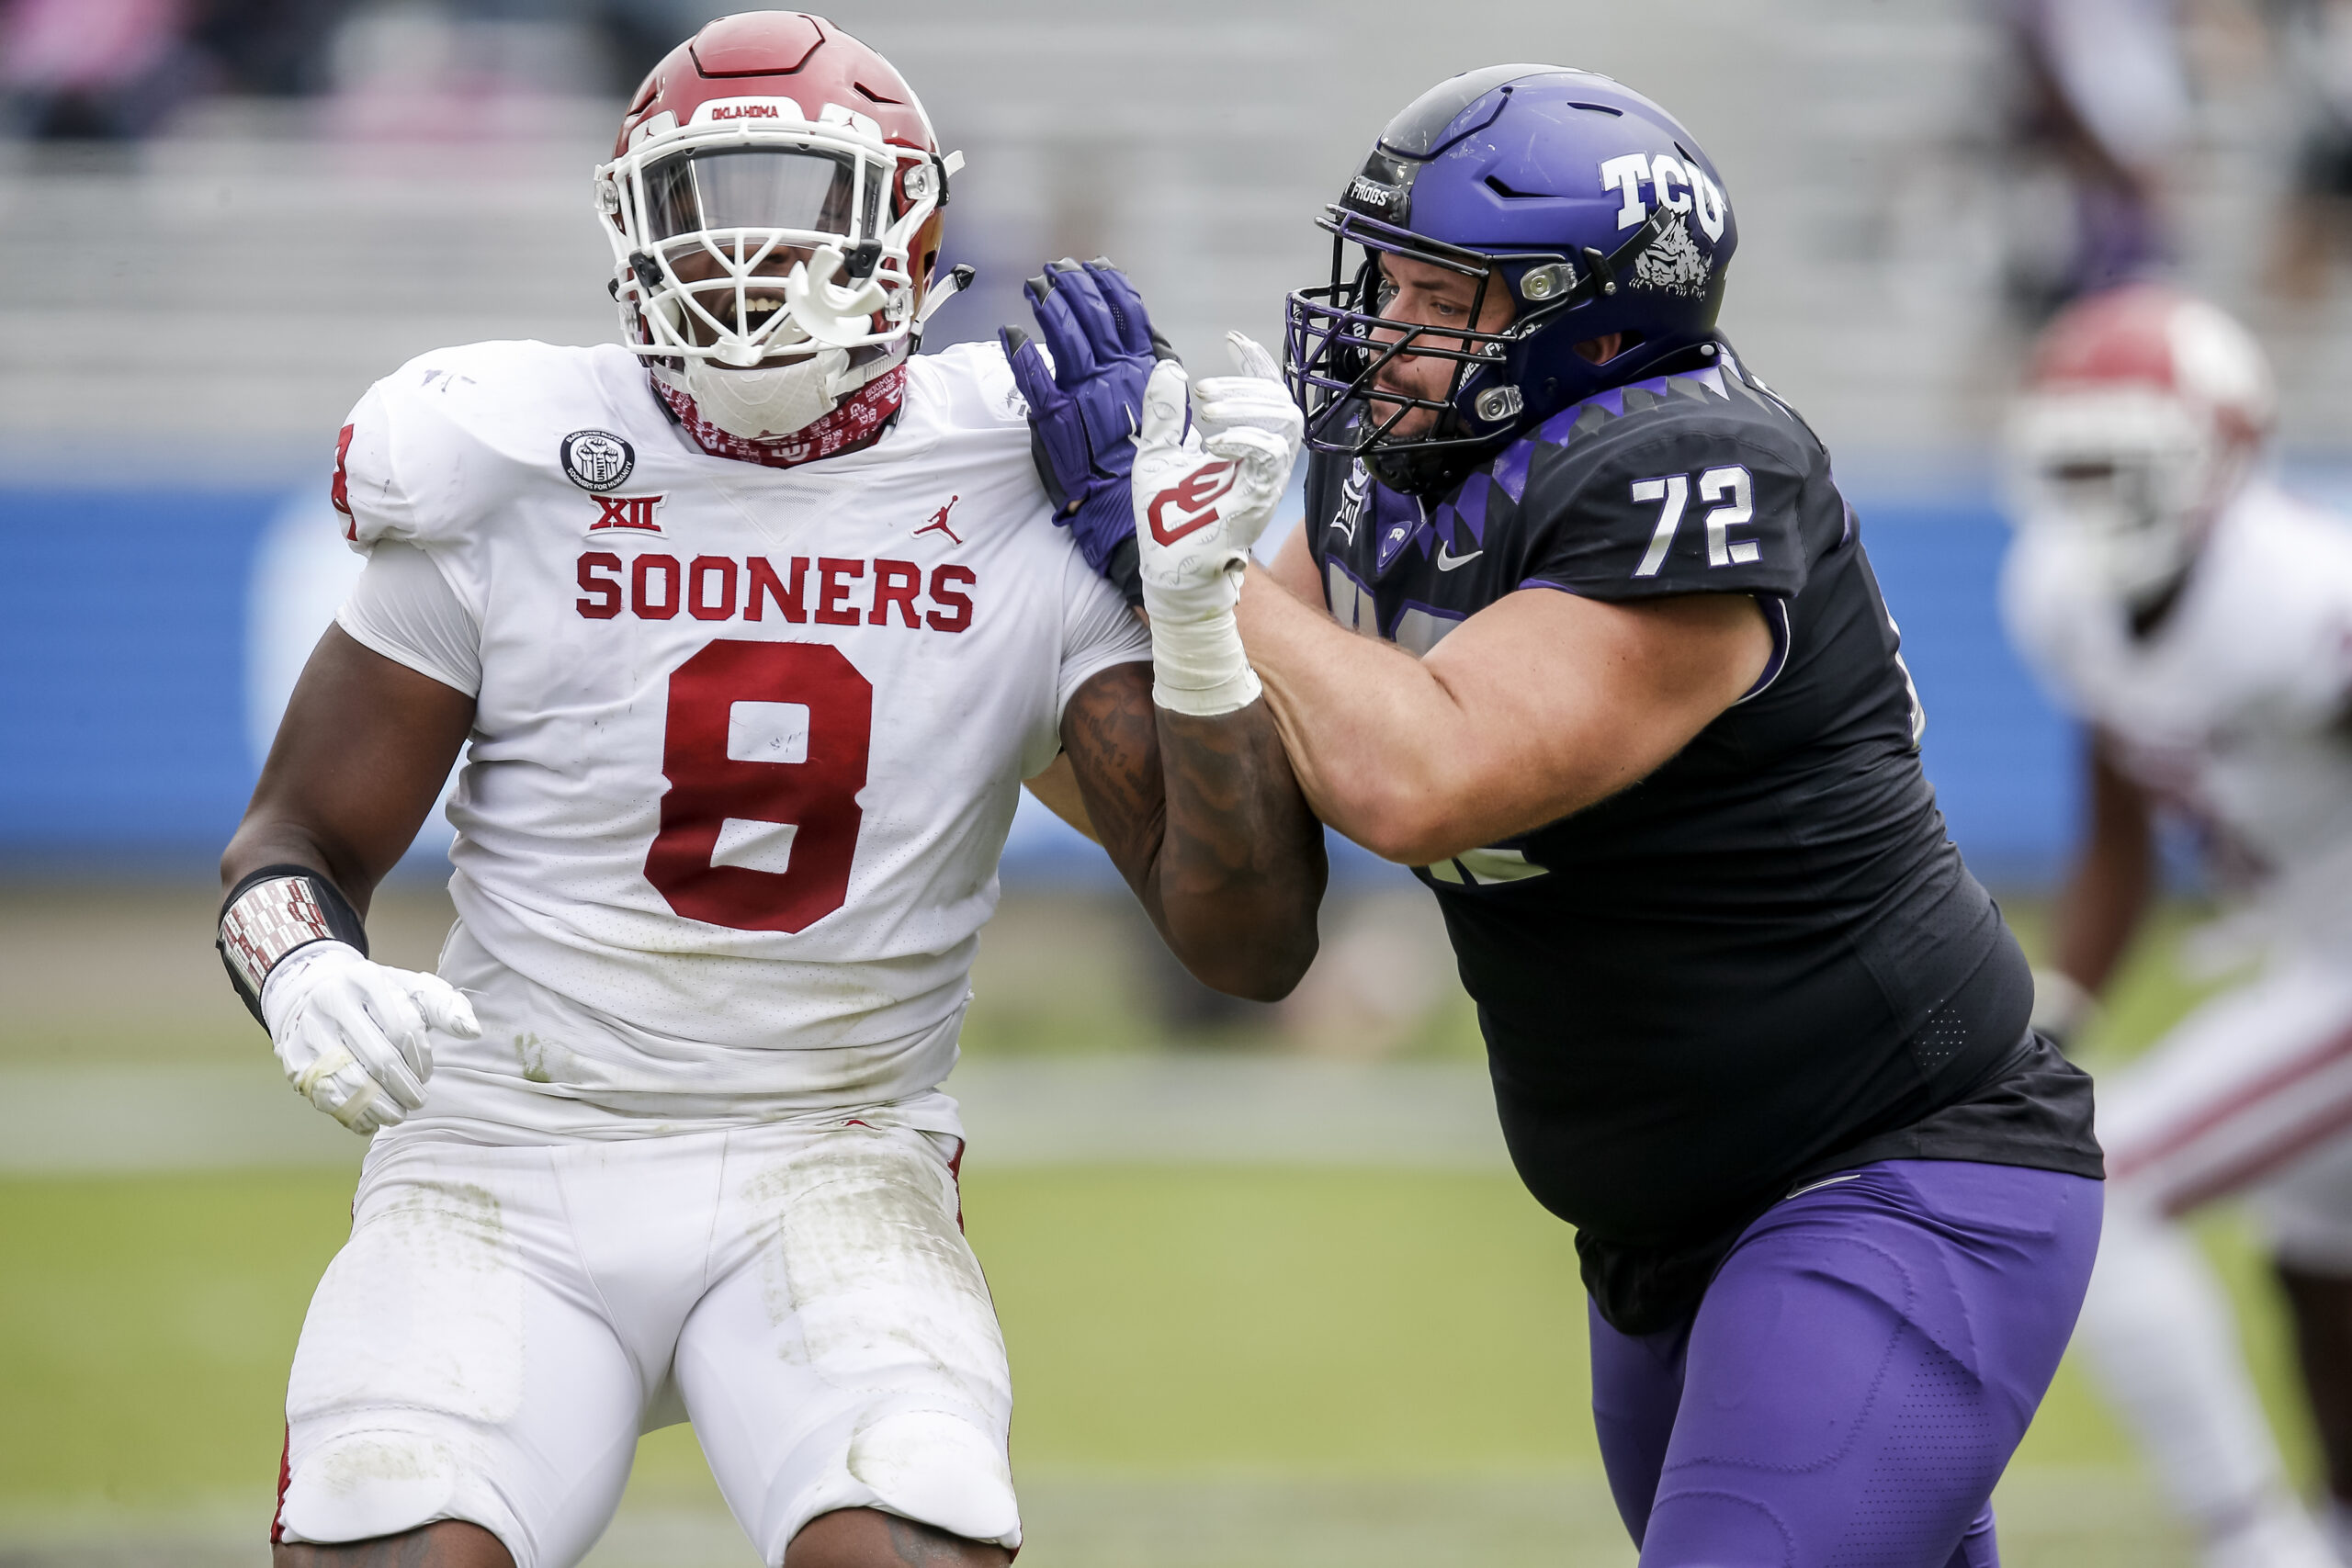 PFF names former Sooner Perrion Winfrey as a prospect that could go earlier than expected